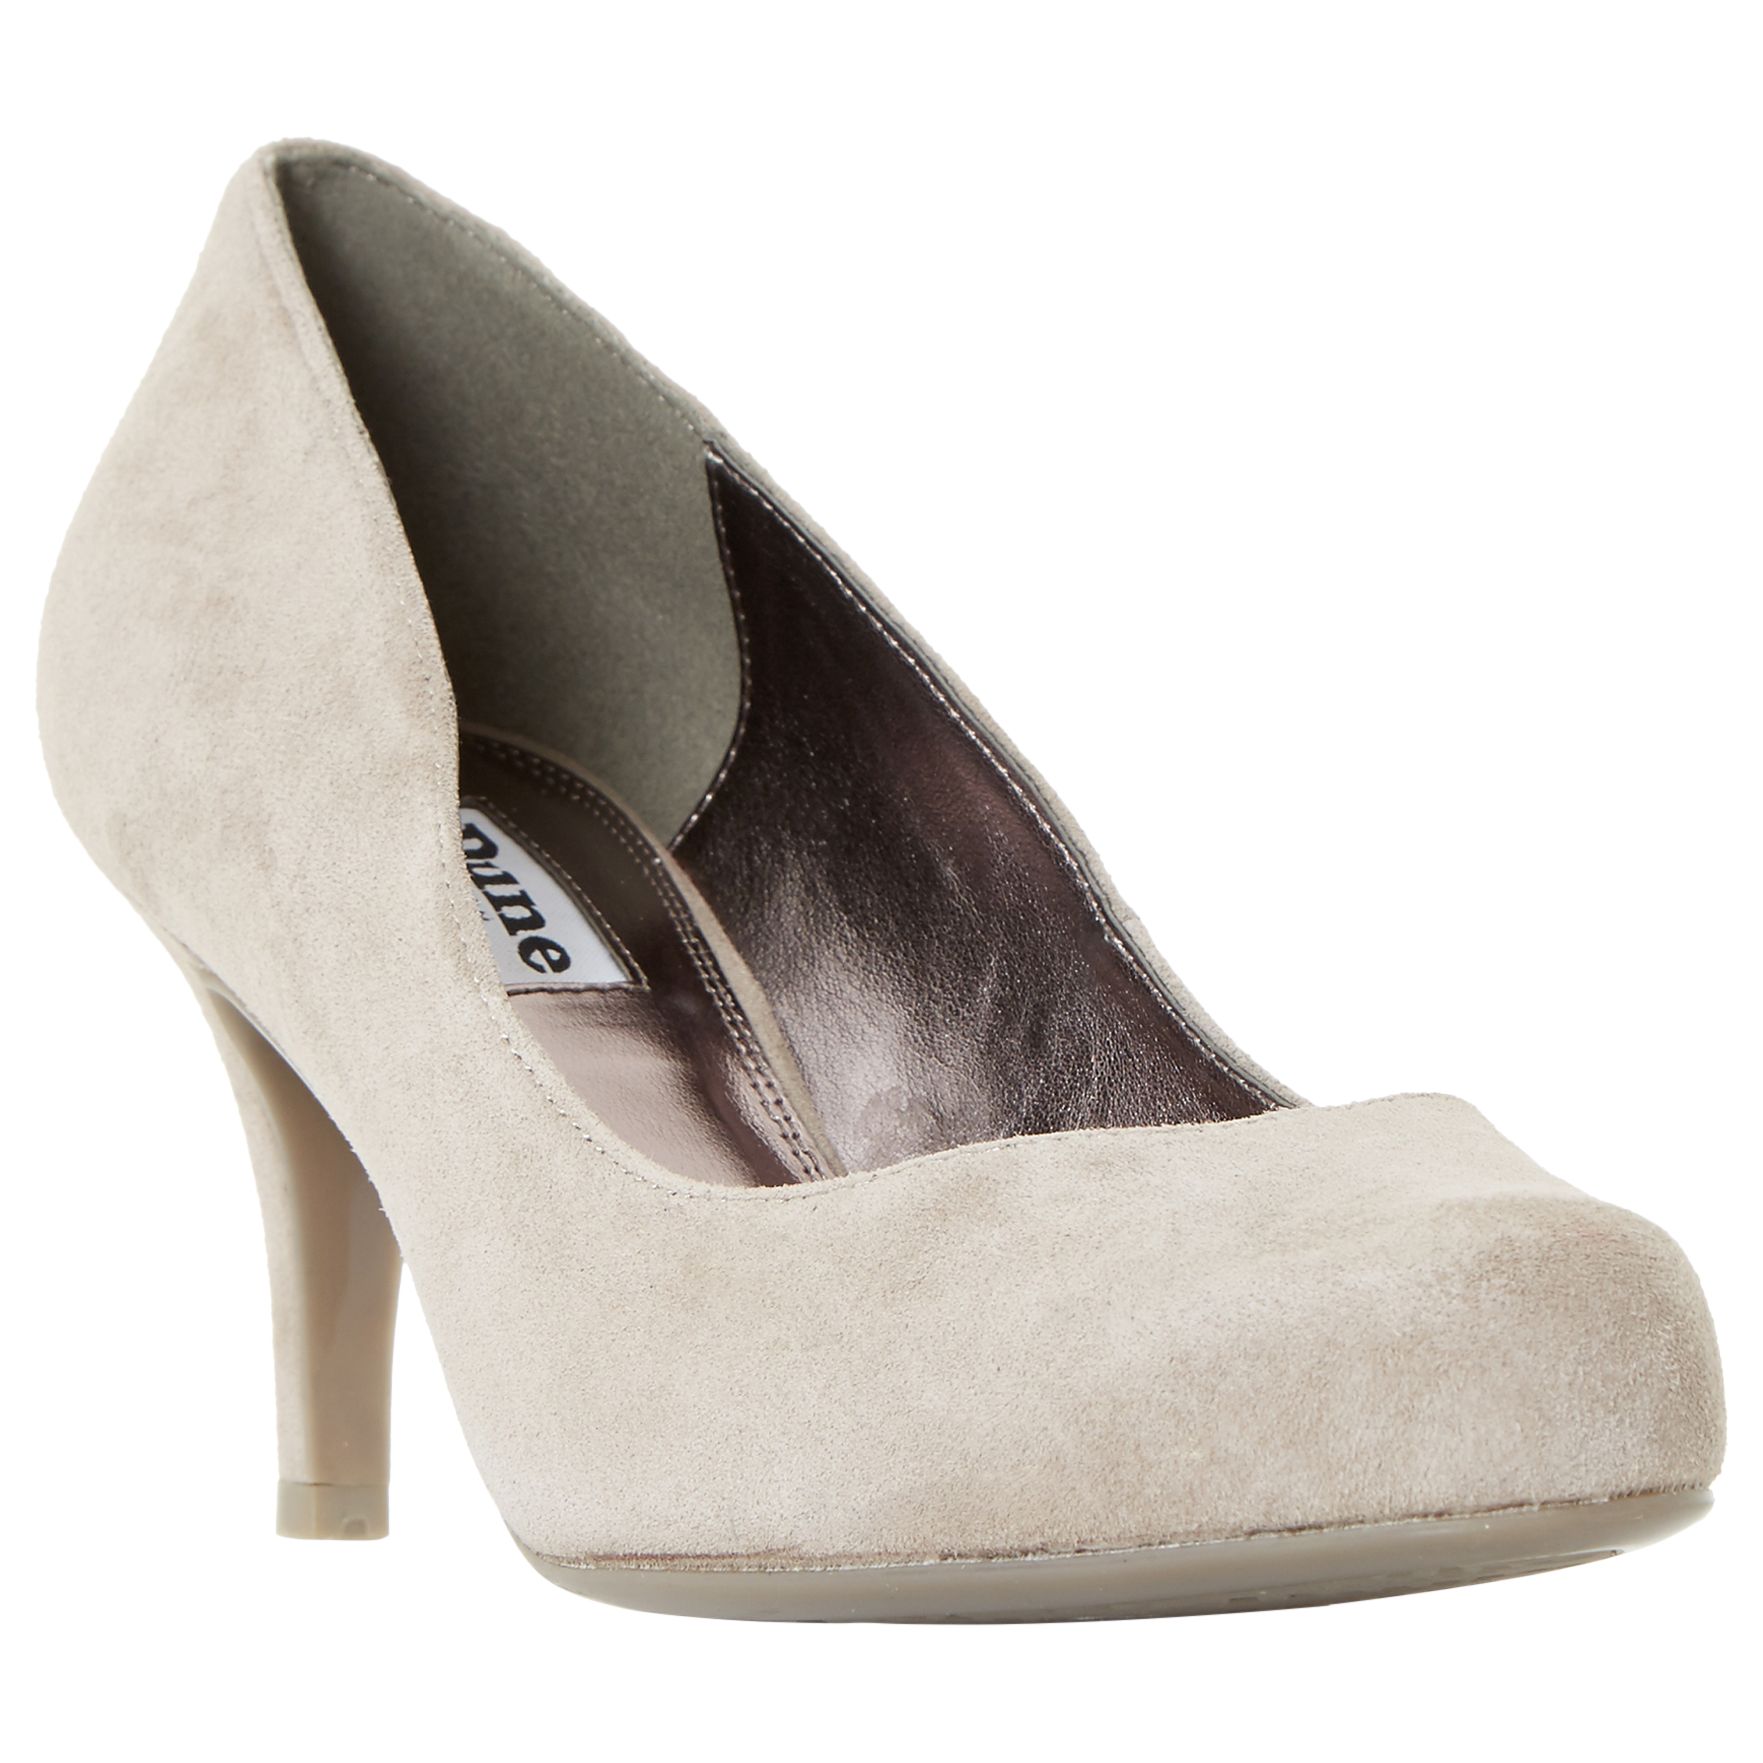 Dune Amelia Stiletto Heeled Court Shoes, Taupe Suede, 6